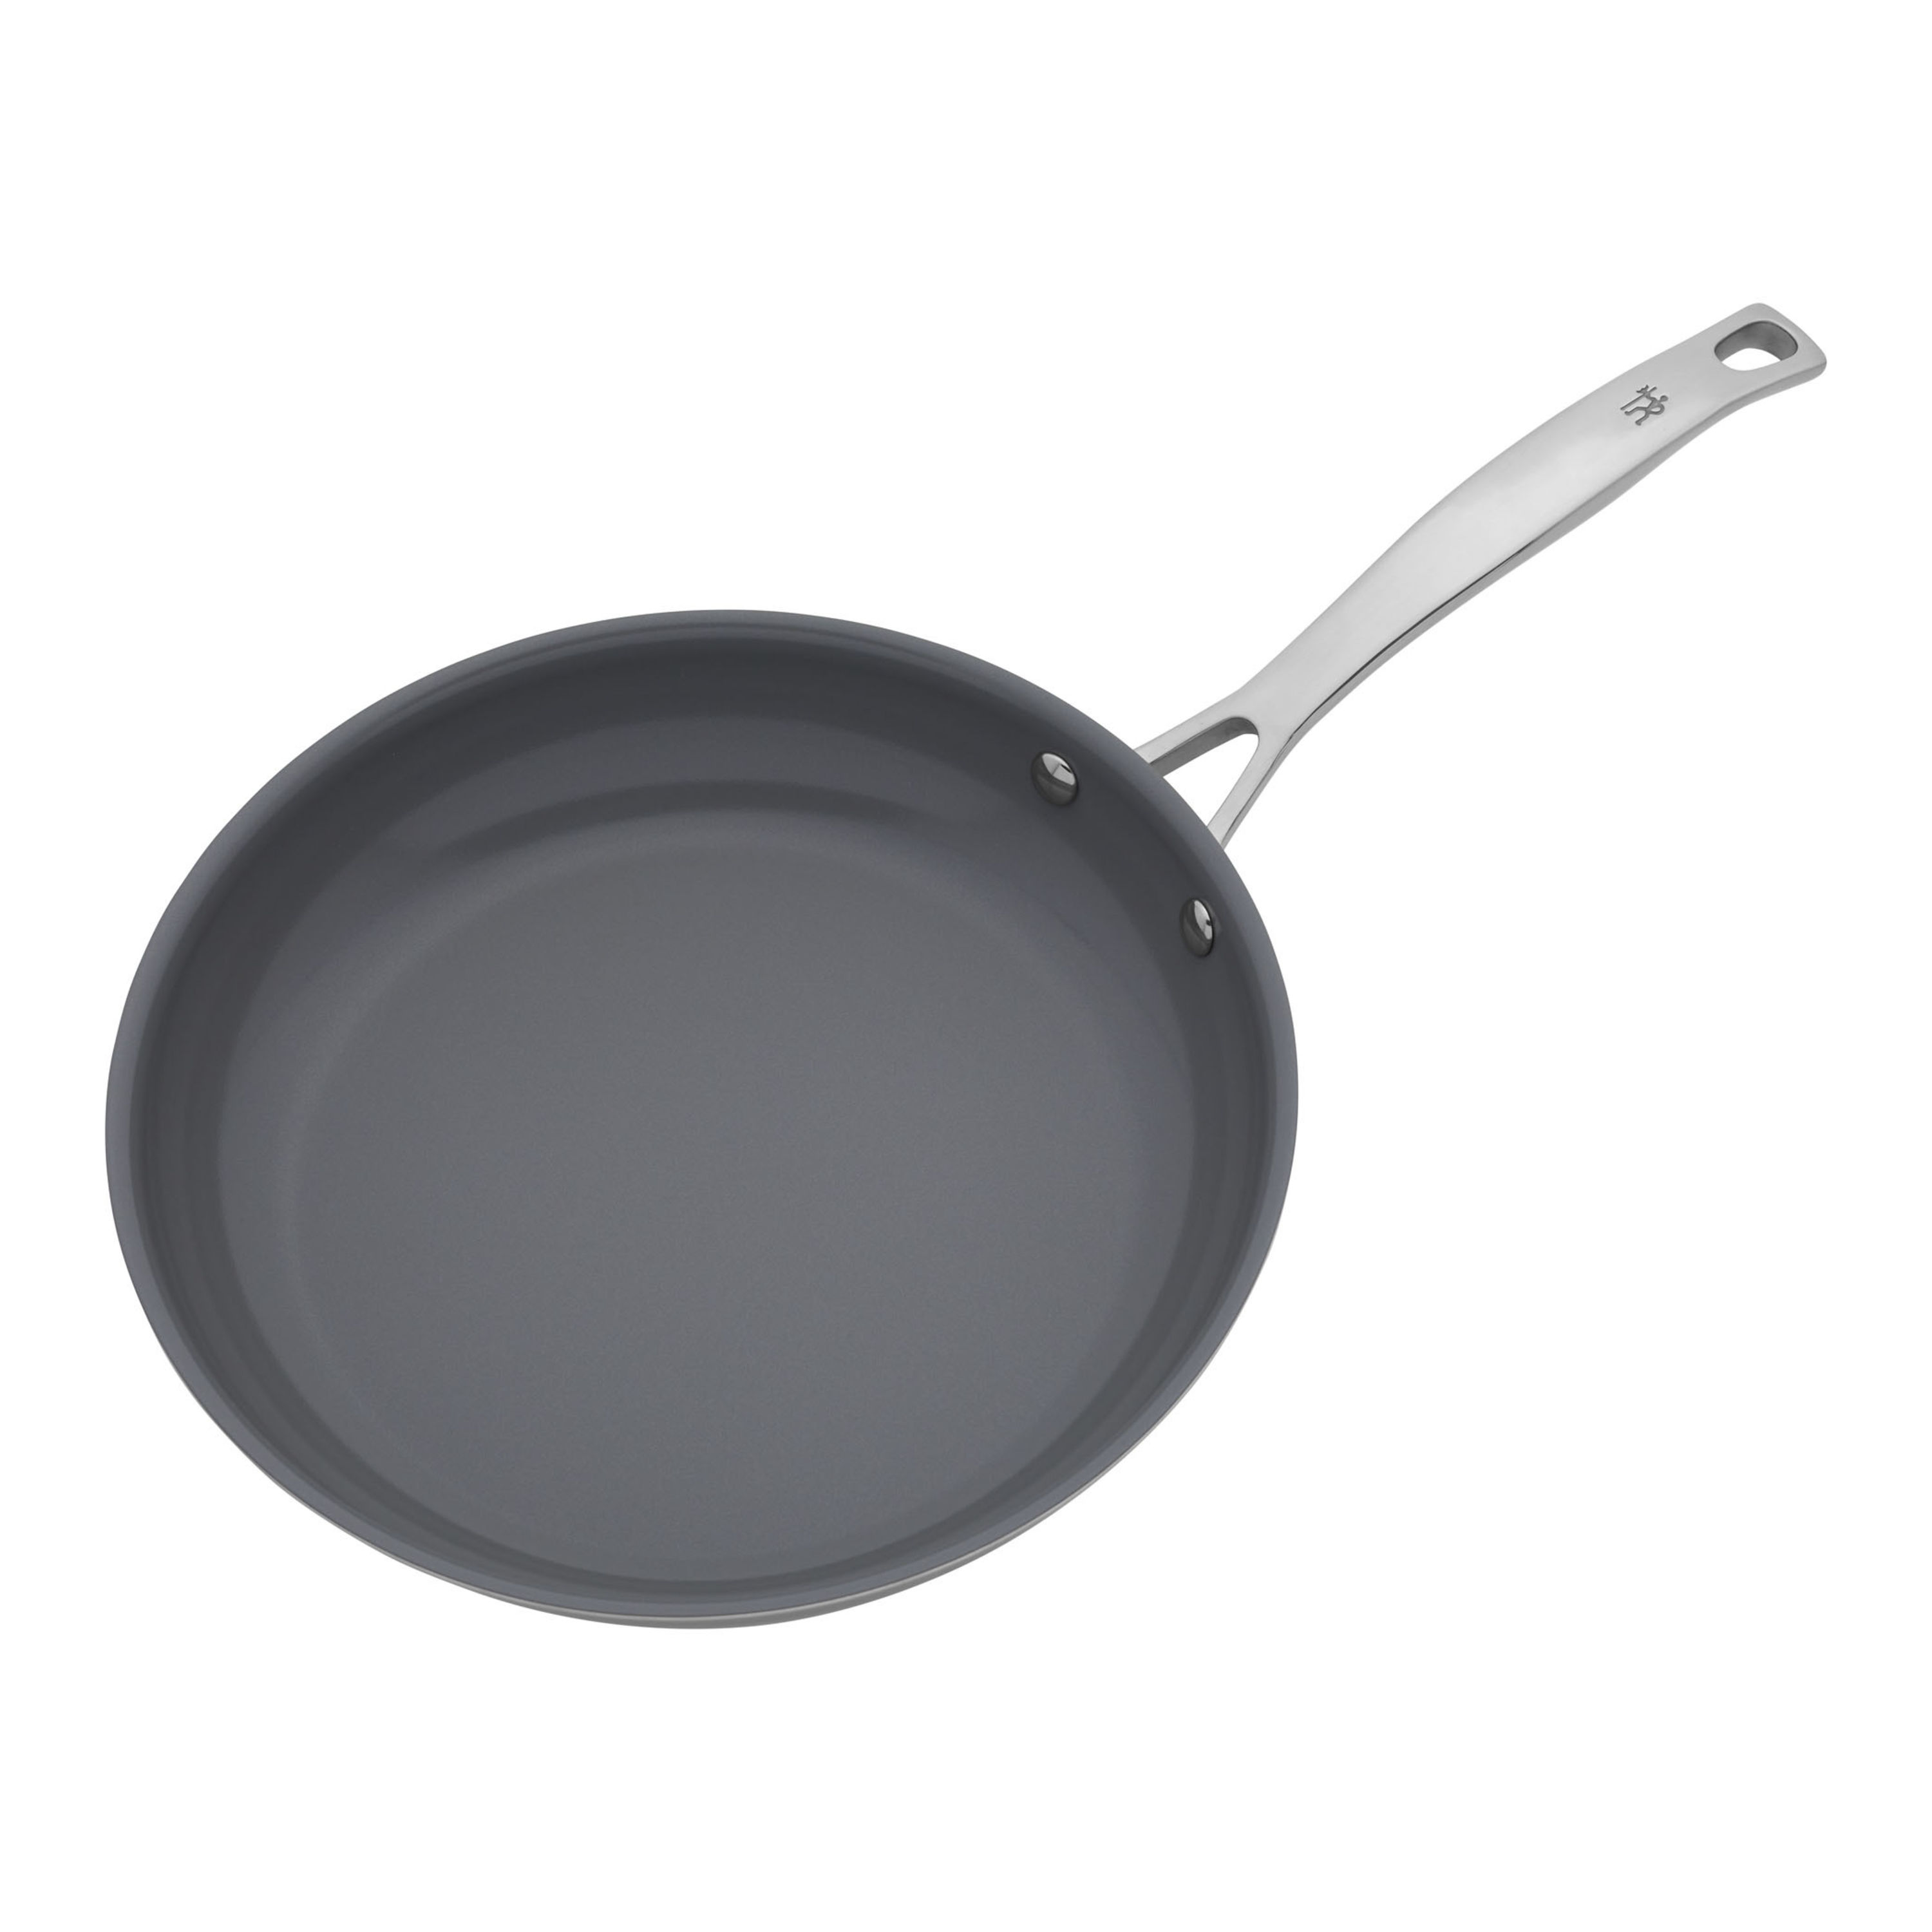 Henckels Clad H3 2-pc Stainless Steel Ceramic Nonstick 10-in & 12-in Fry Pan  Set, 2-pc - Fry's Food Stores